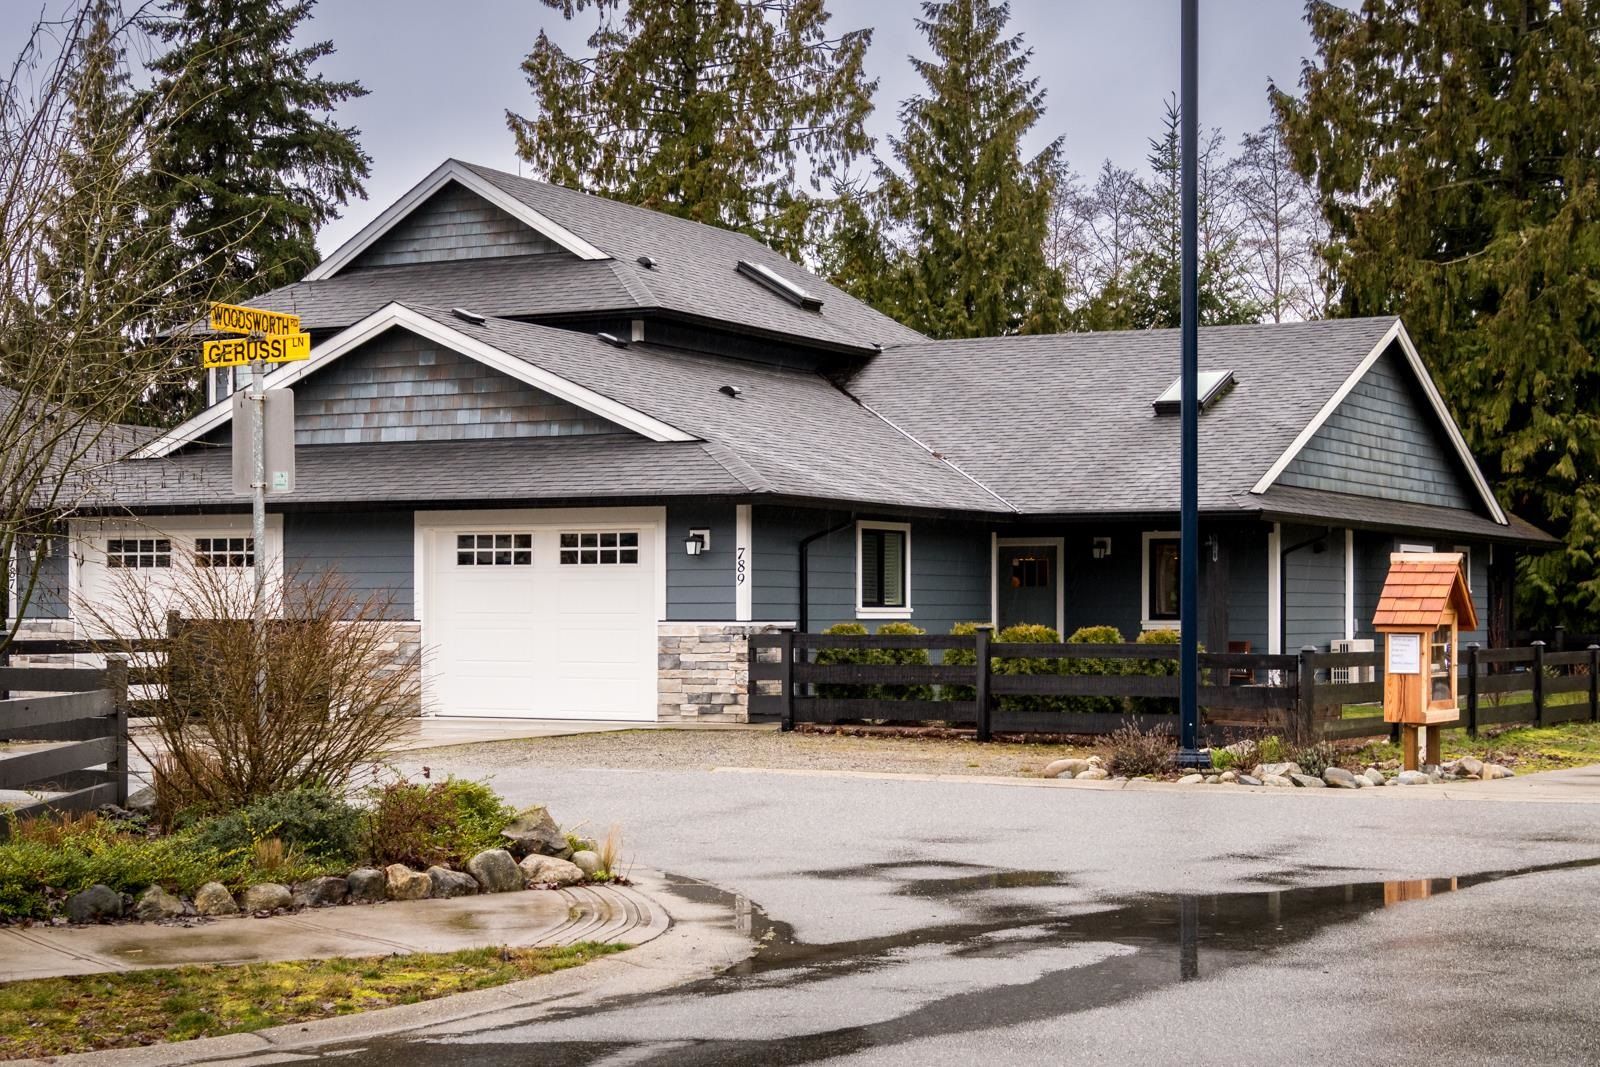 View our listing at 789 GERUSSI LANE in Gibsons